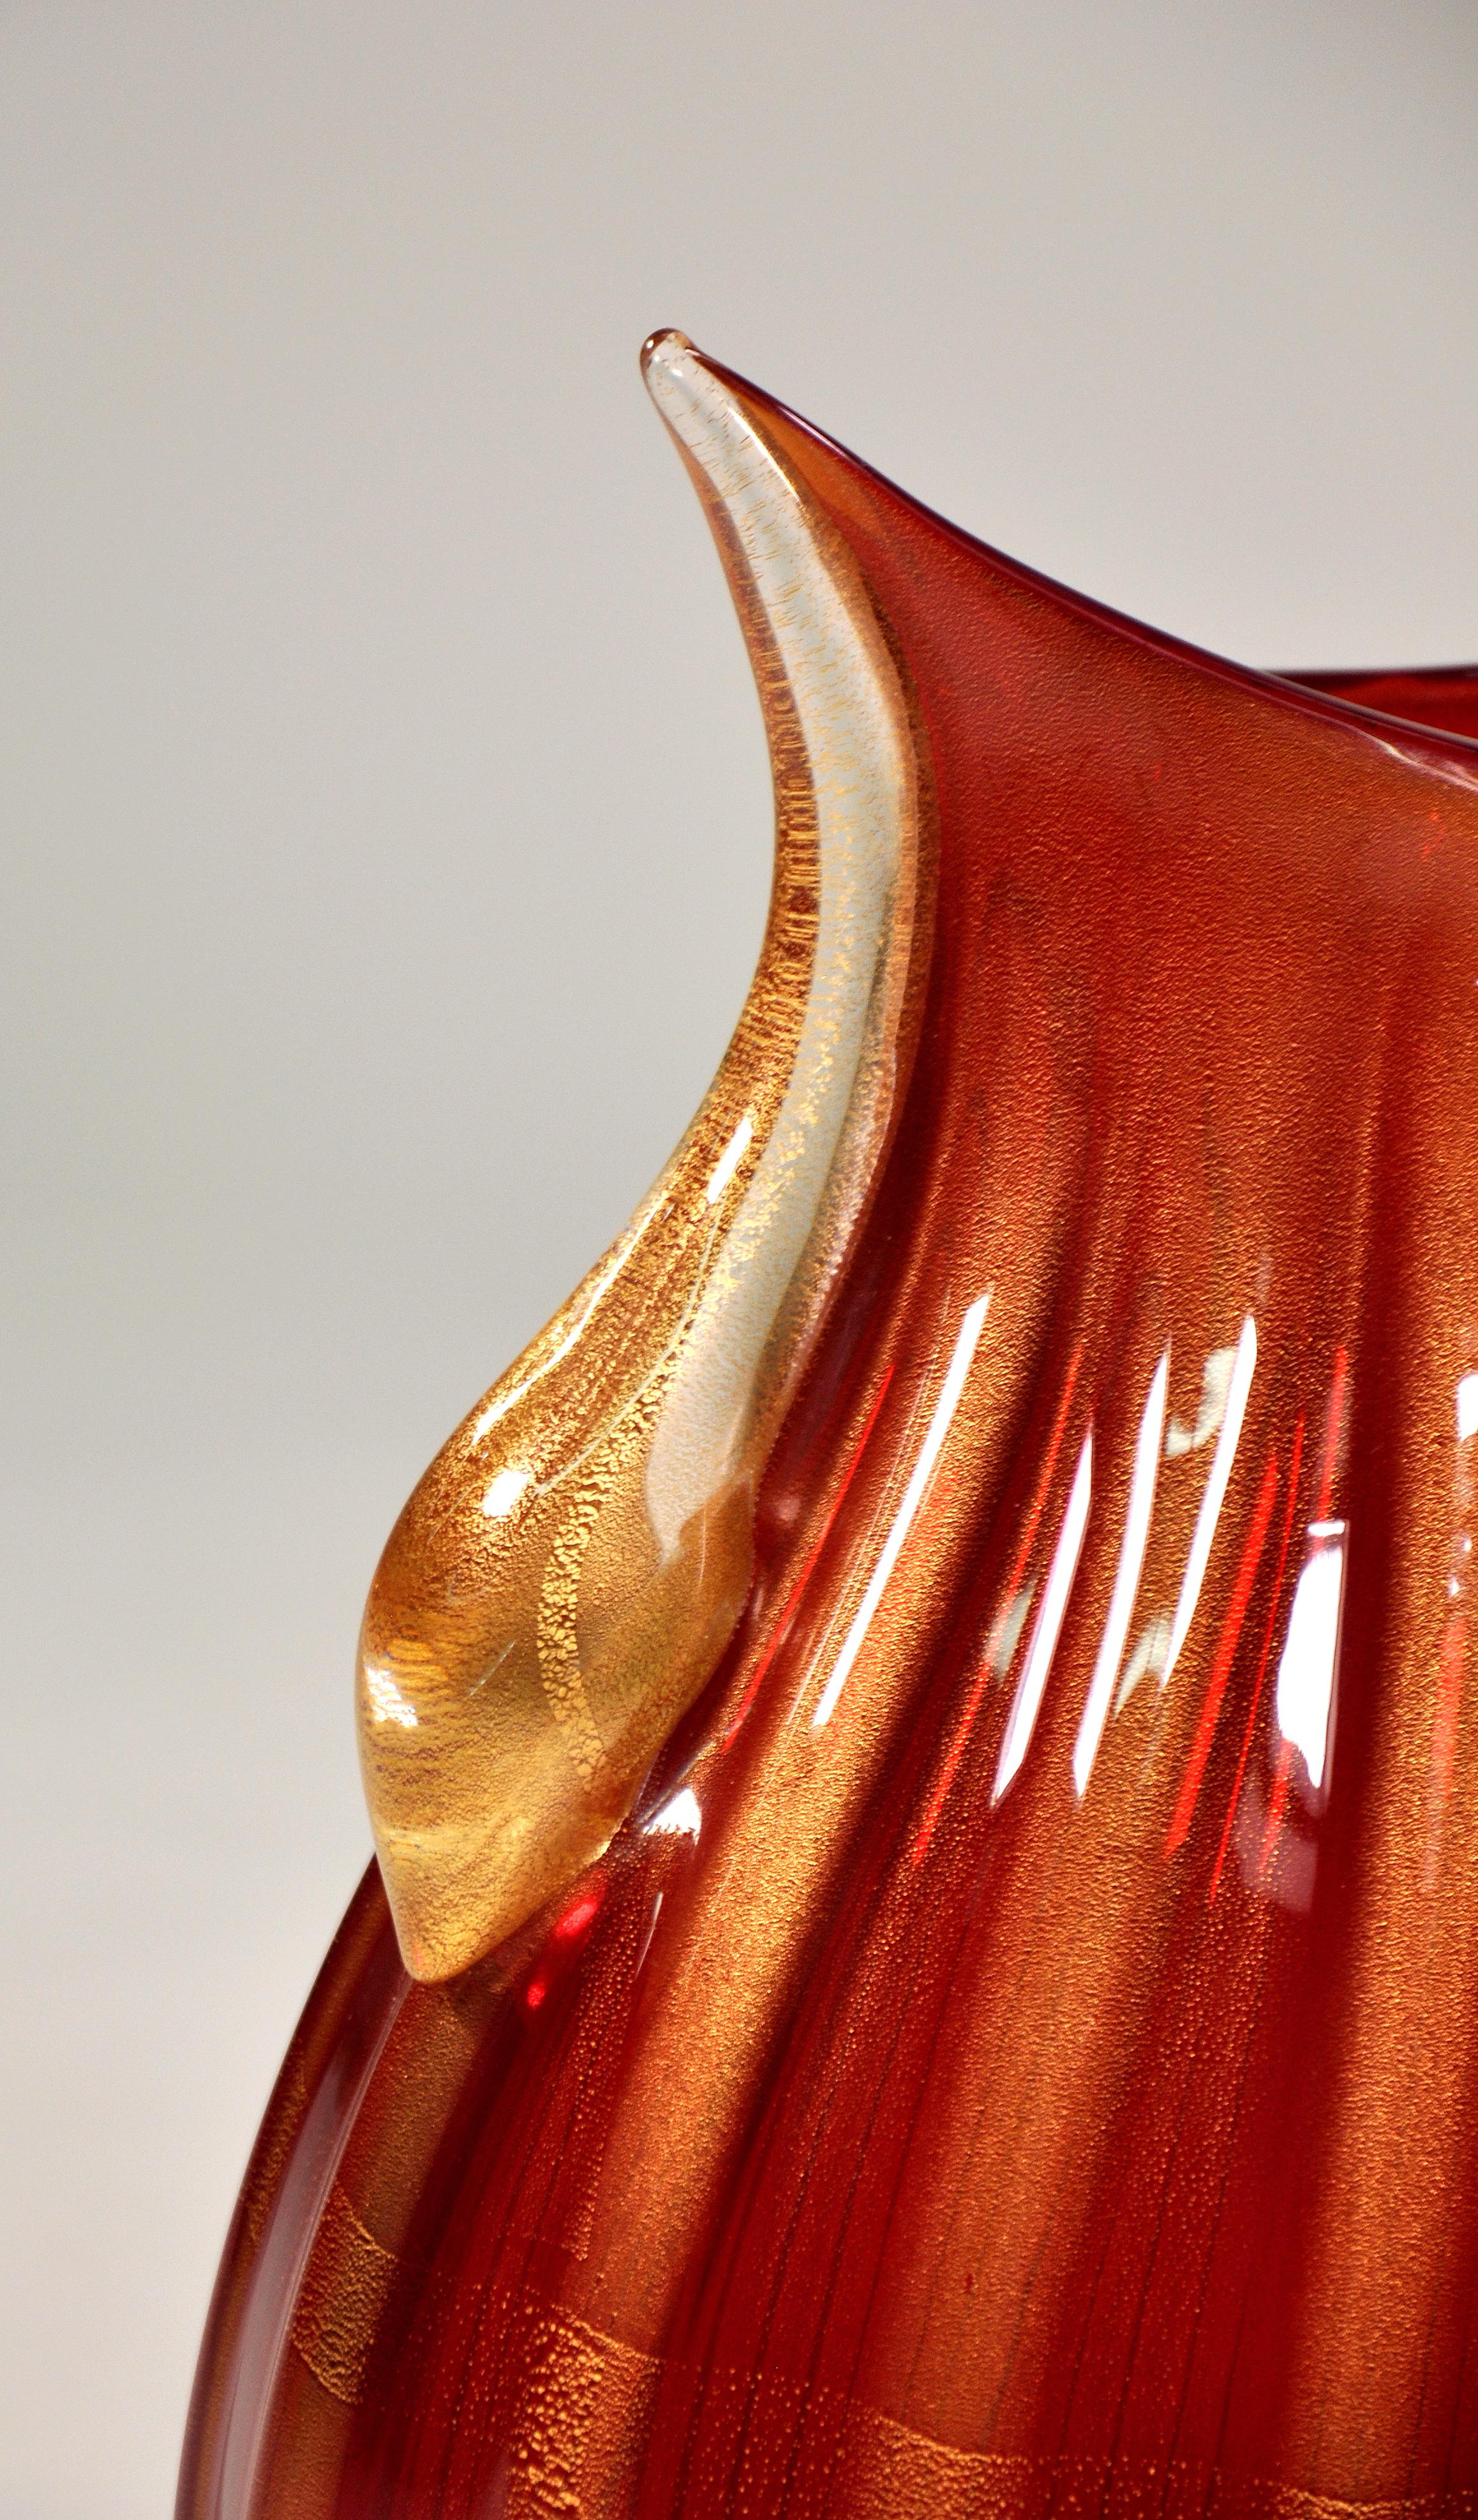 Large Pino Signoretto Red and Gold Murano Glass Vase, 1960s For Sale 2